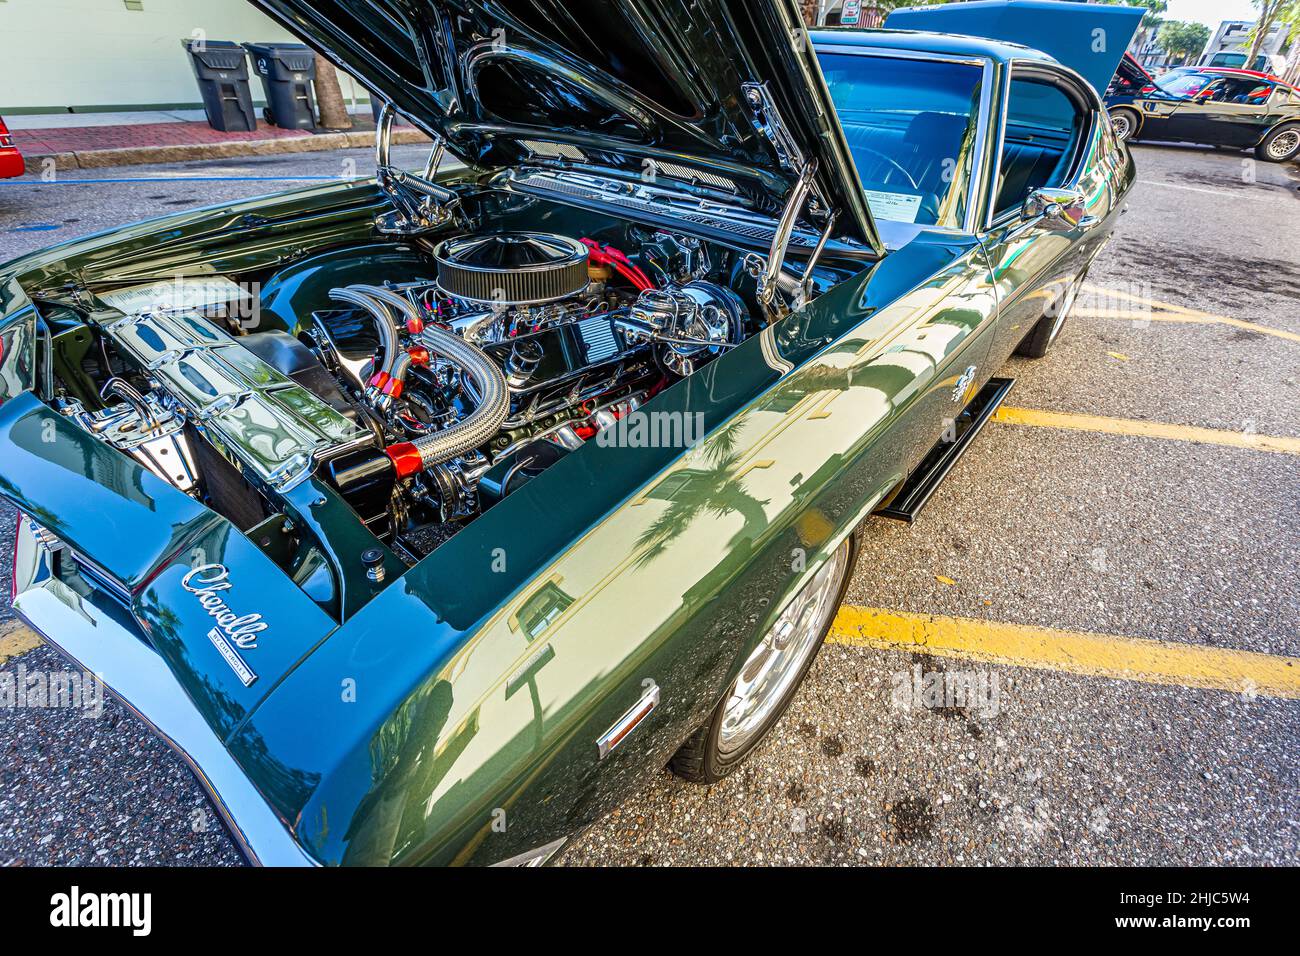 Fernandina Beach, FL - October 18, 2014: Wide angle front corner view of a 1969 Chevrolet Chevelle SS 396 Coupe at a classic car show in Fernandina Be Stock Photo